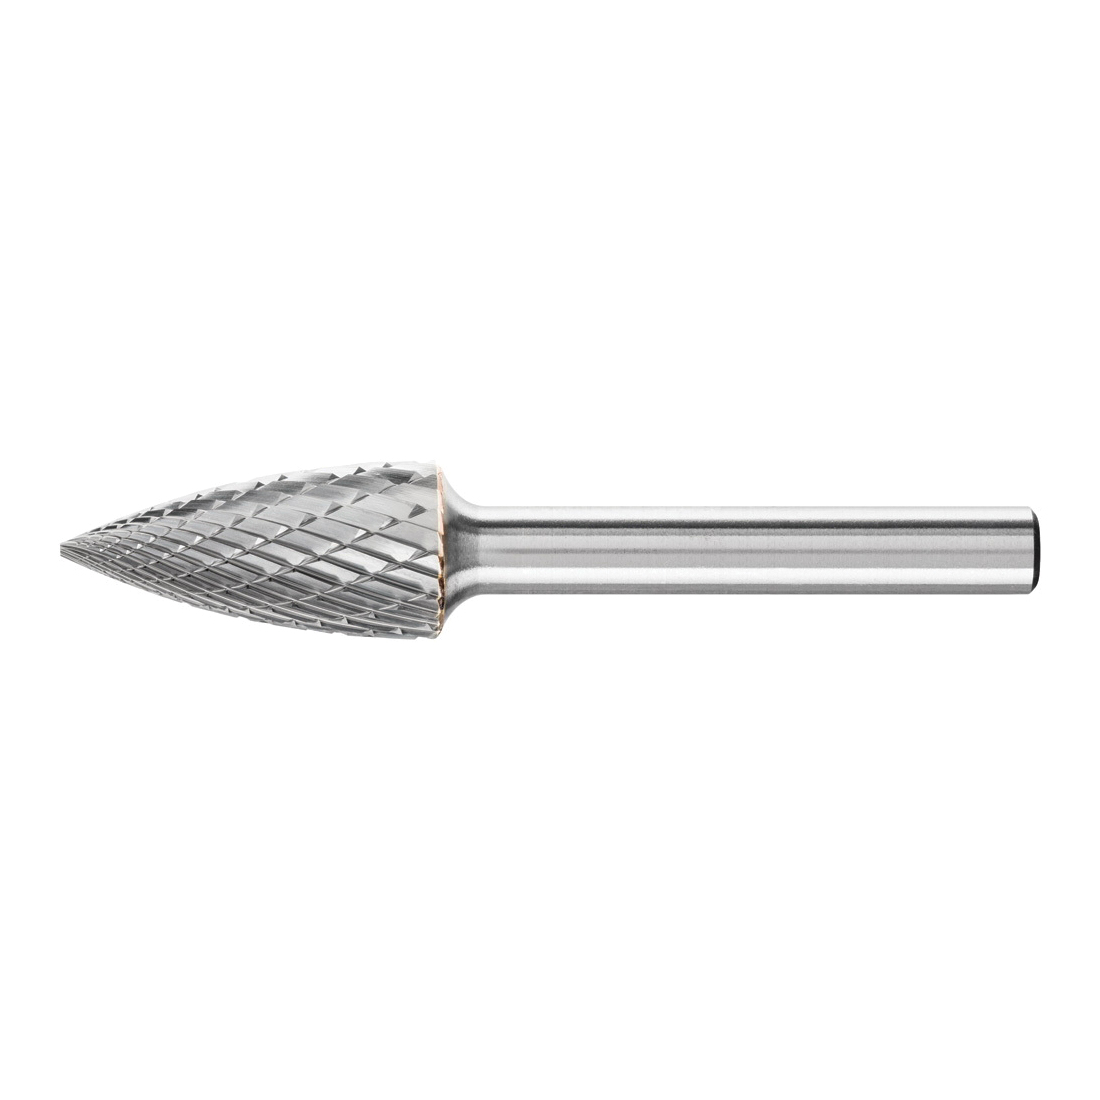 PFERD 24812 Universal Line Premium Grade Carbide Burr, Pointed End, Tree Pointed (Shape SG) Head, 1/2 in Dia Head, 1 in L of Cut, 2-3/4 in OAL, Double Cut Cut